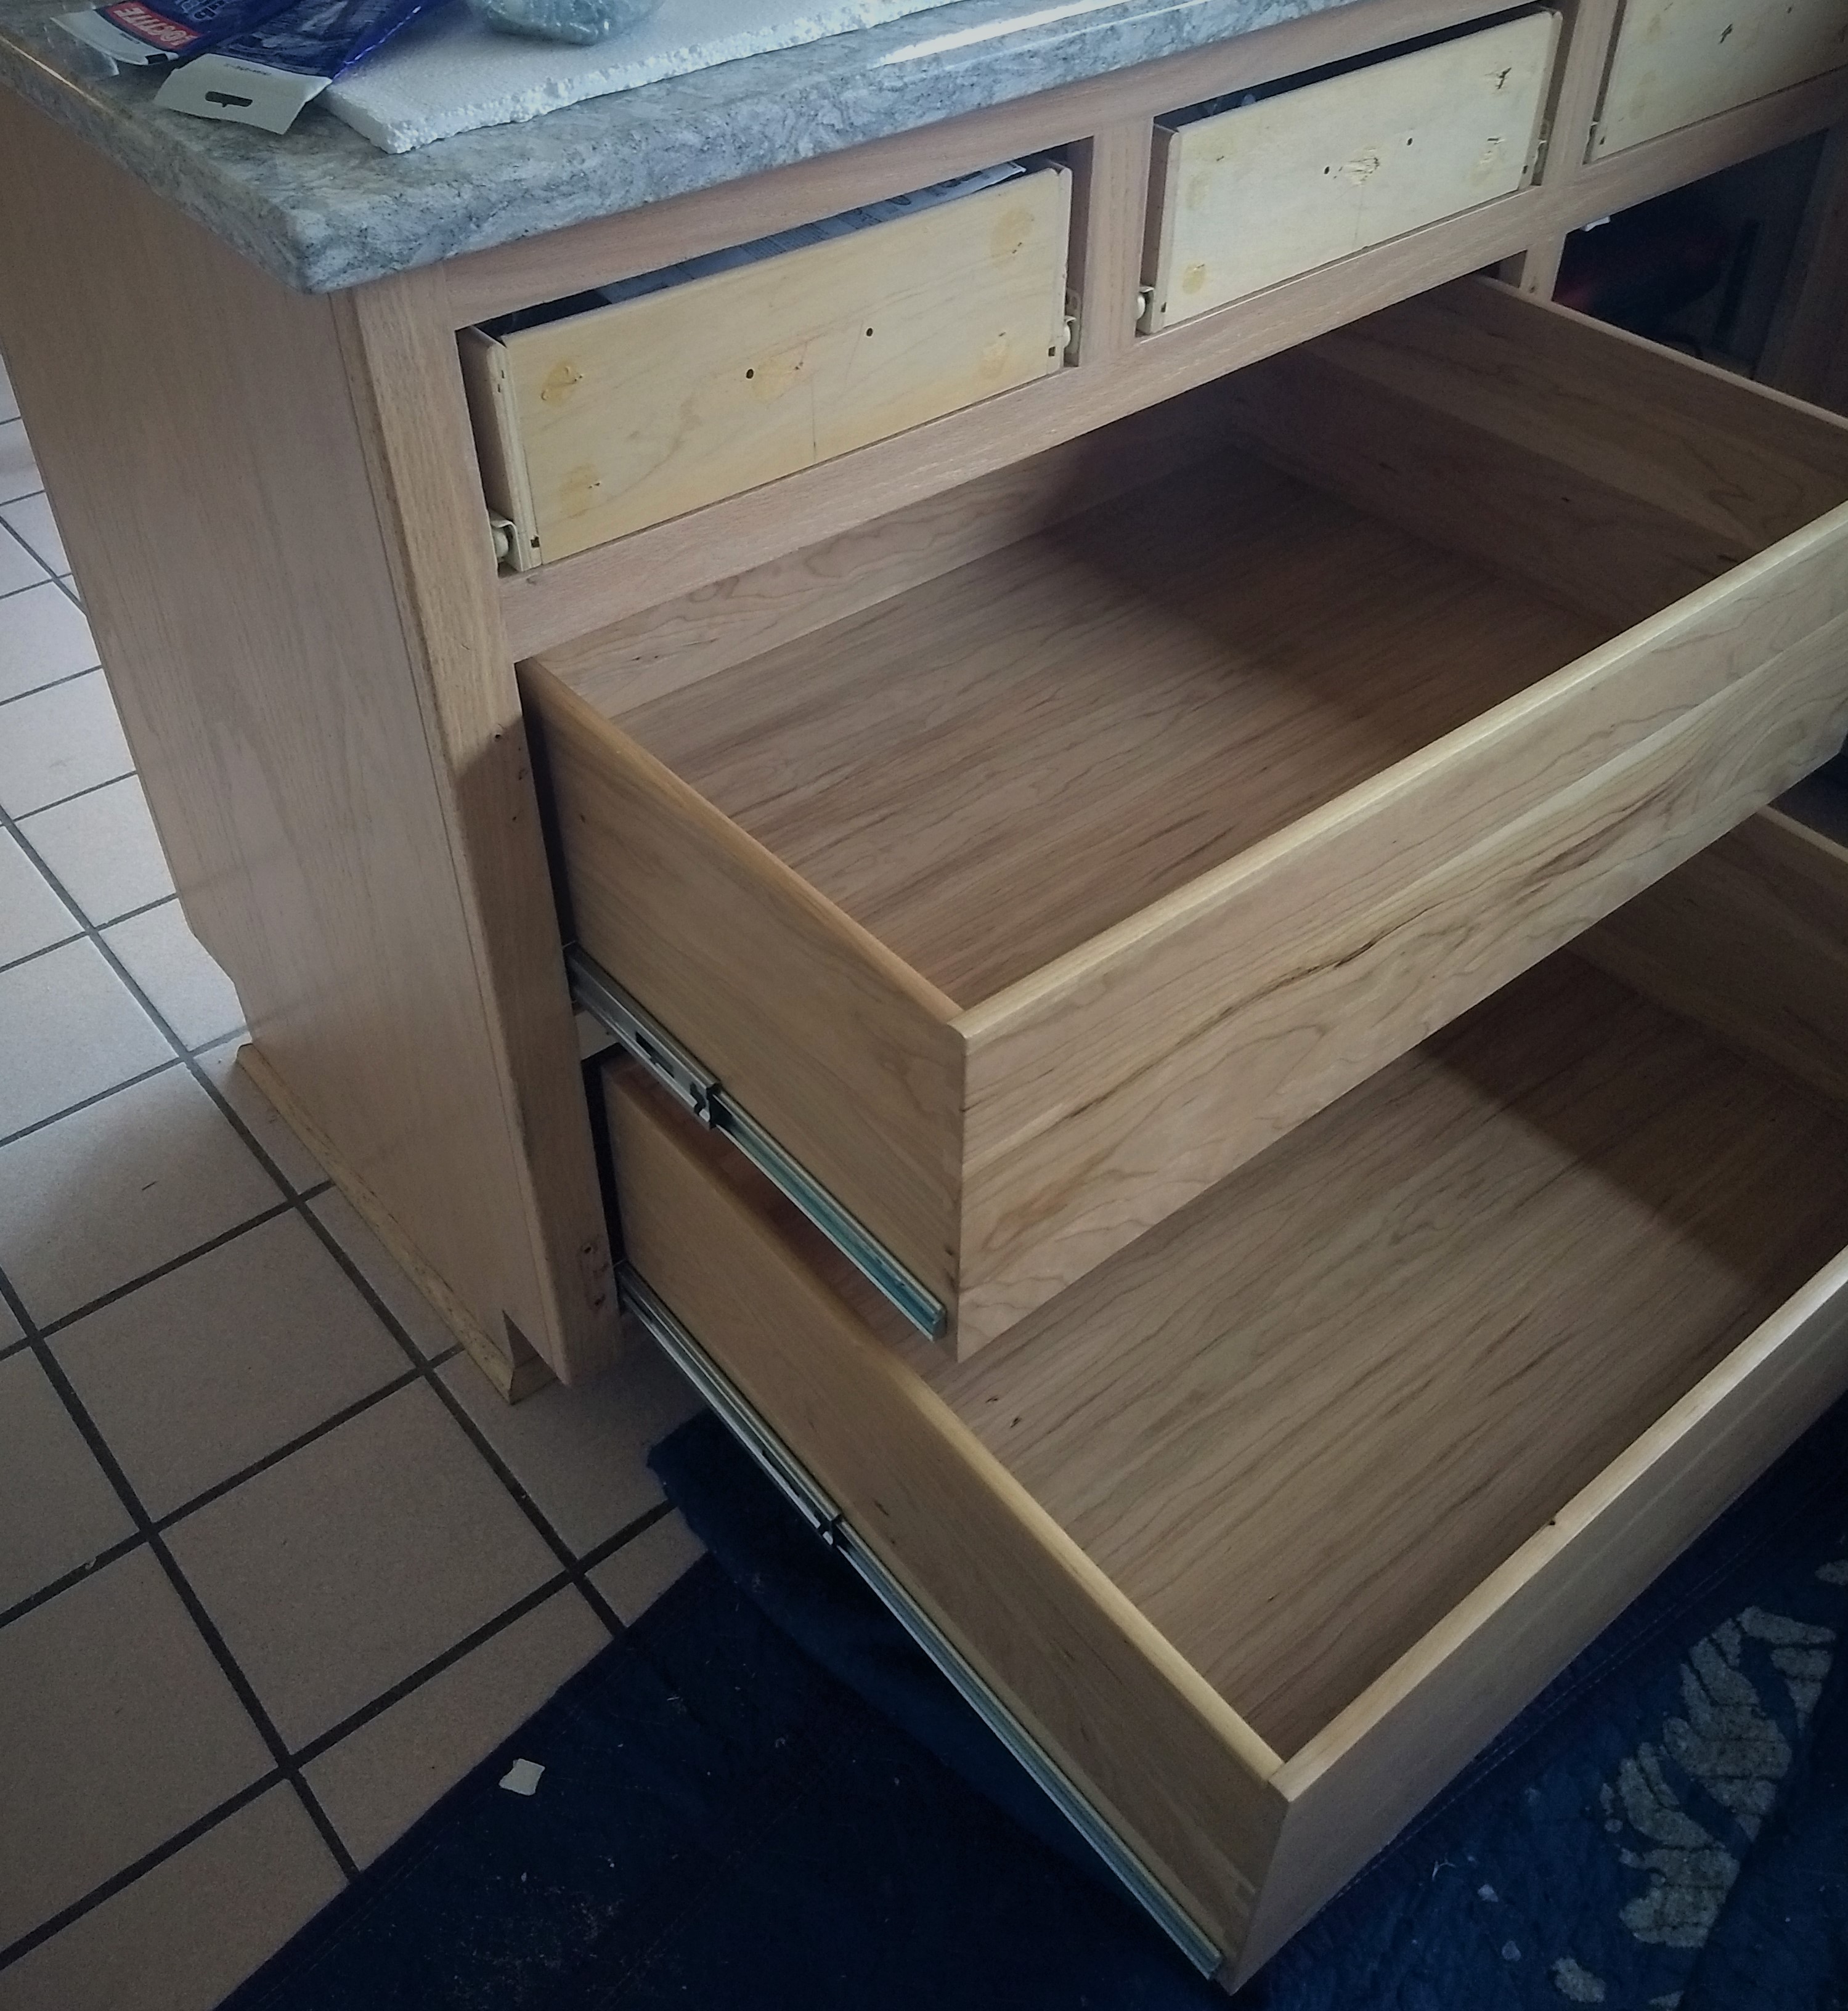 The Pros to Having Drawers Instead of Lower Cabinets